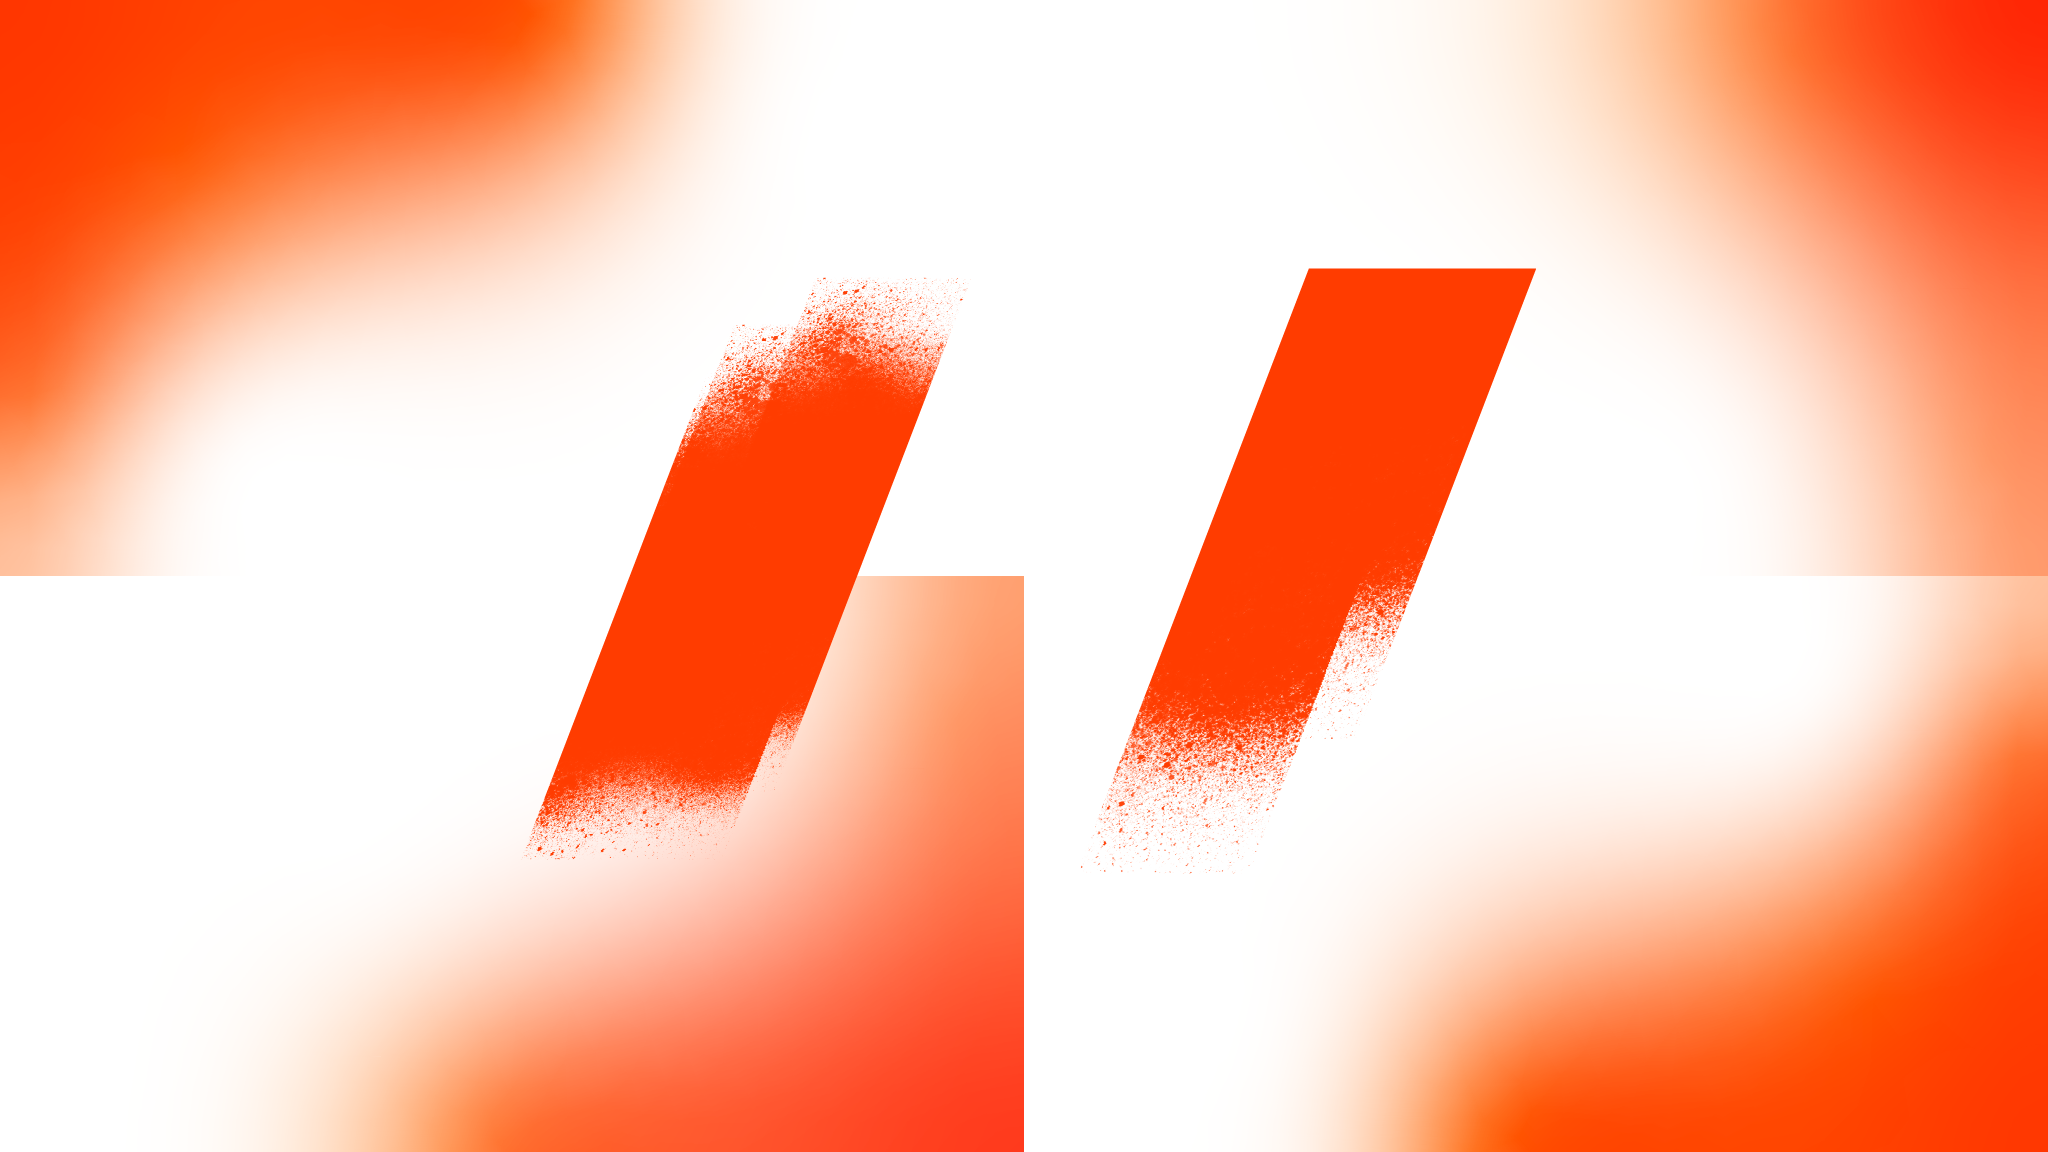 An abstract image of orange, red, and white color gradients. The image is divided into four rectangles that form one large rectangular composition. At the center are two vertical parallelograms, leaning to the right.